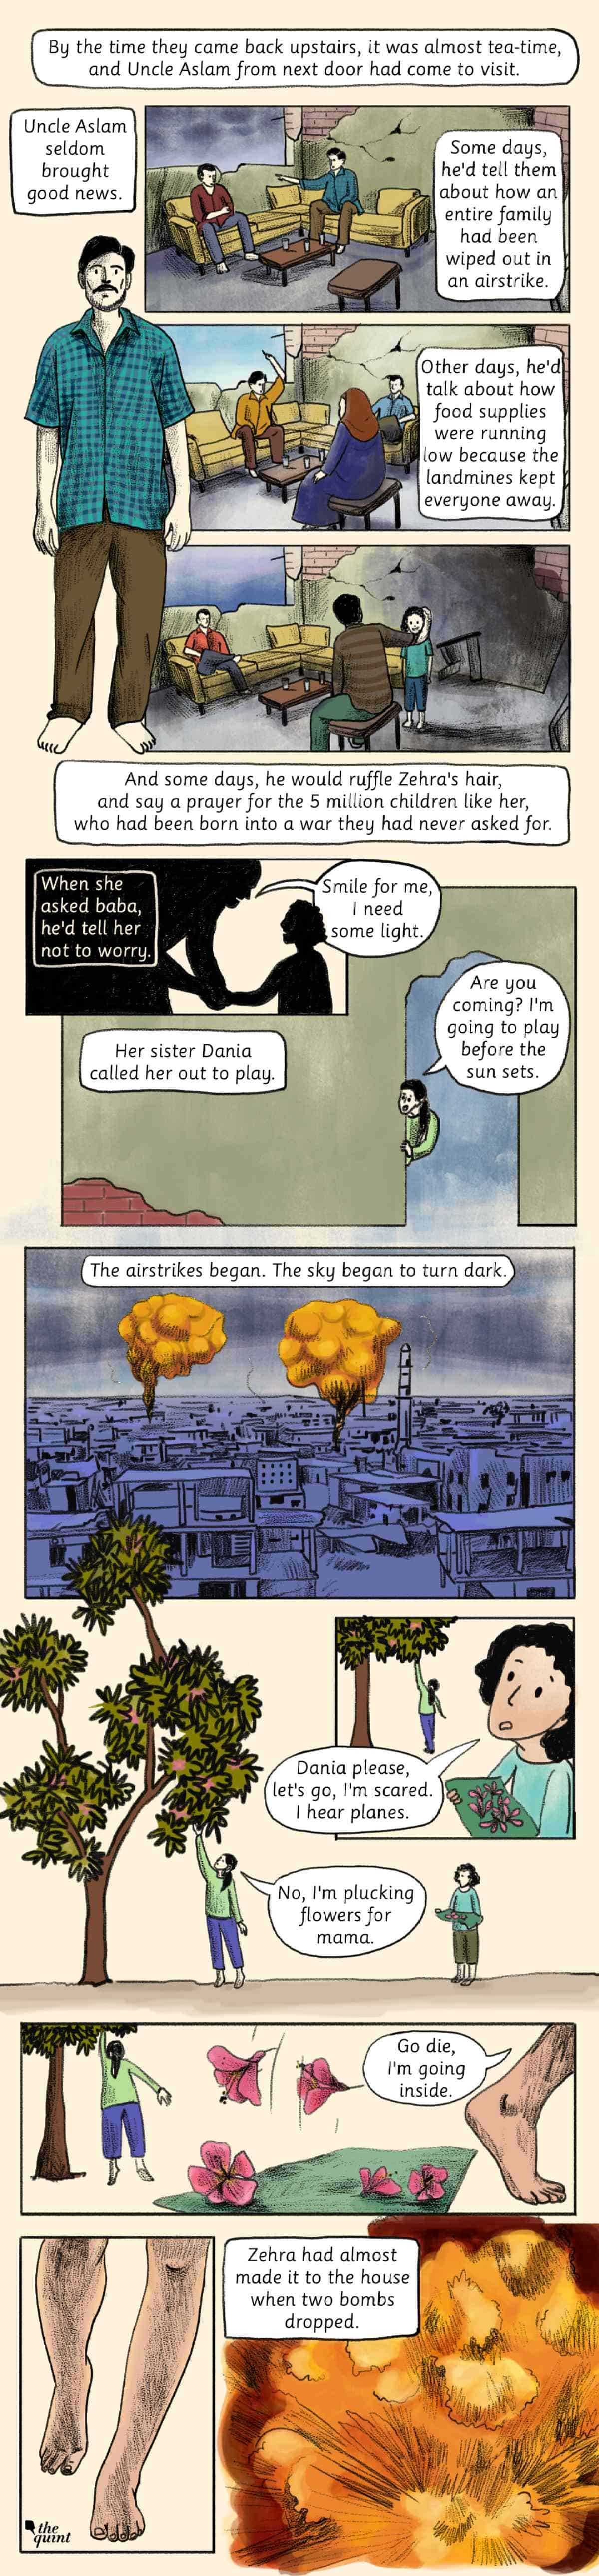 Zehra: A Generation Lost to the Syrian War, a Graphic Novel. Illustrations: Susnata Paul